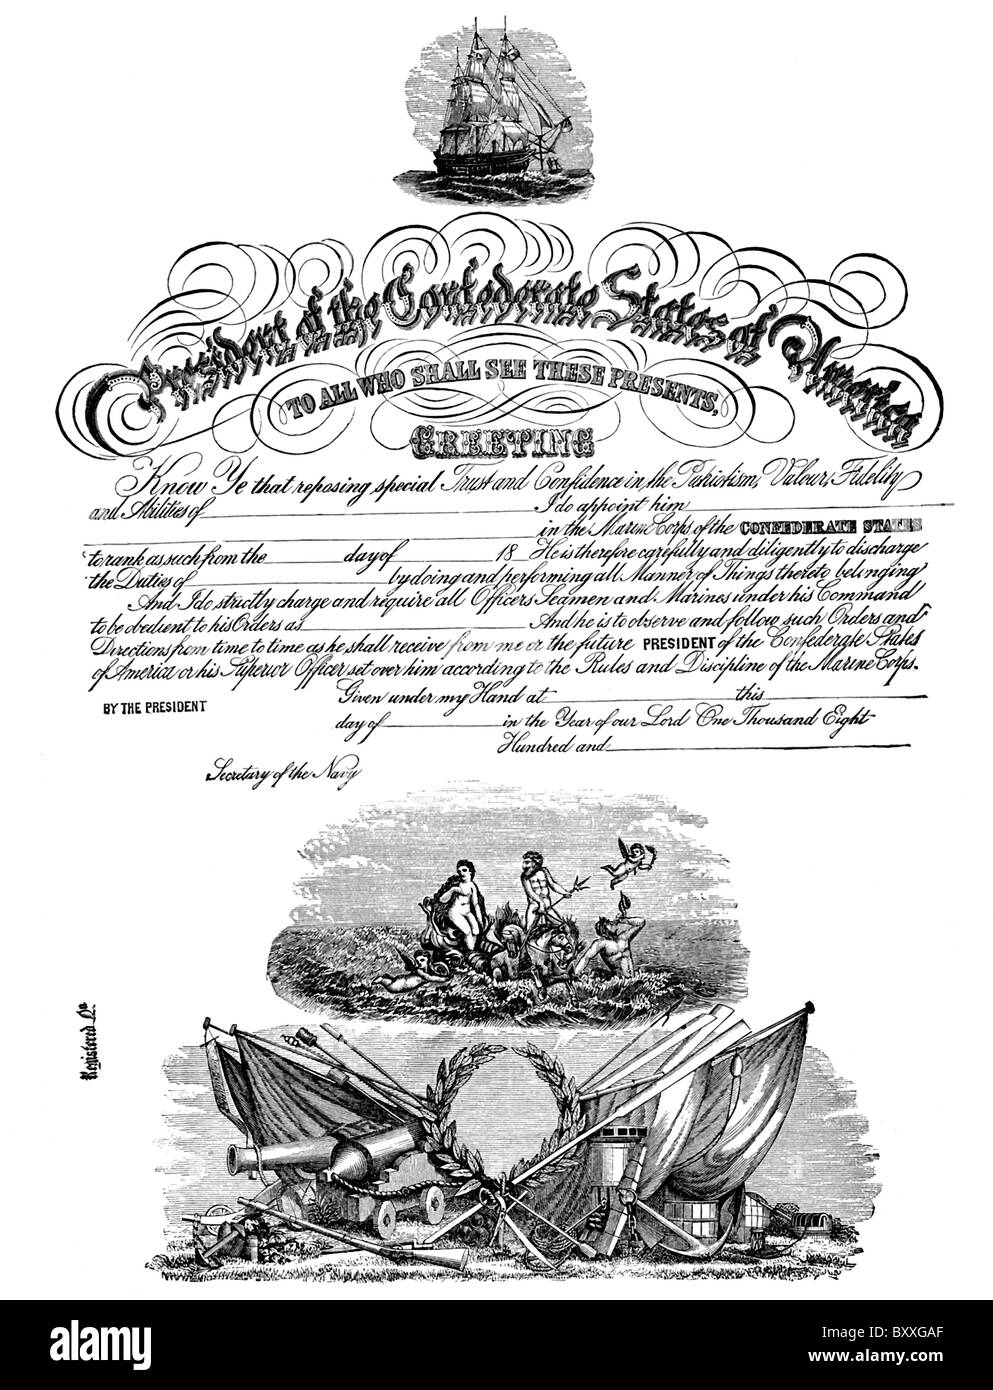 President of  Confederacy and  Confederate Secretary of the Navy issued this Confederate Naval Commissions during Civil War. Stock Photo